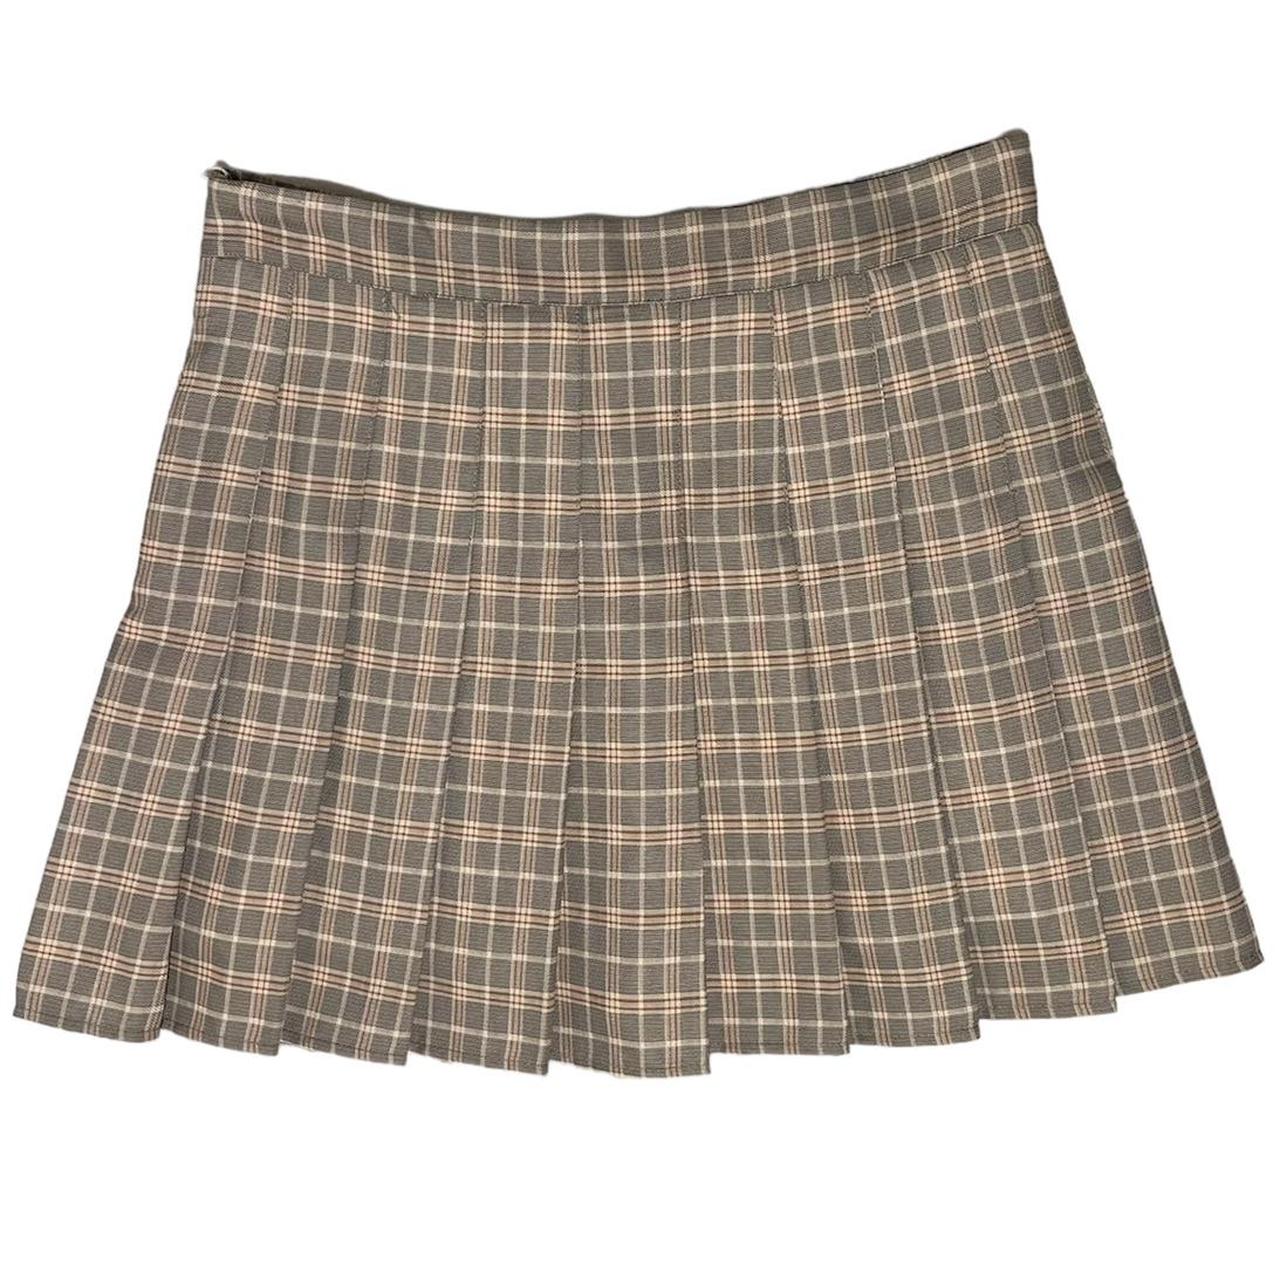 School girl skirt with shorts, no brand name. China